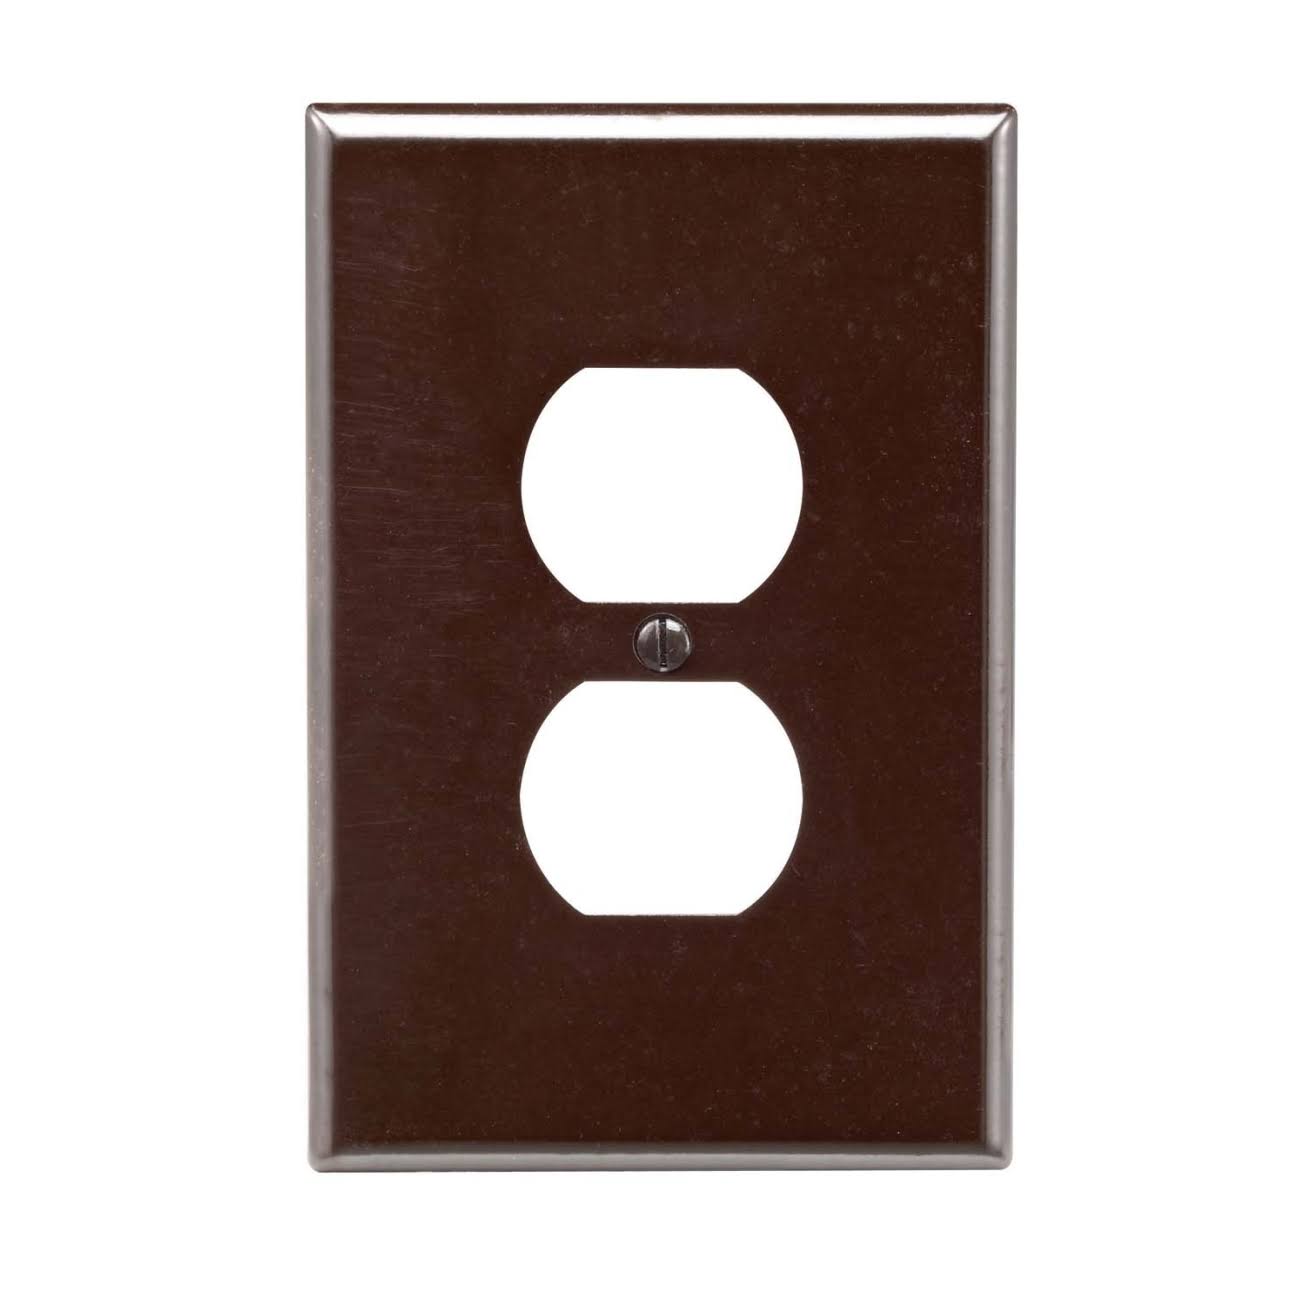 Cooper Wiring Devices Standard Duplex Receptacle Plastic Wall Plate - 1 gang, Brown